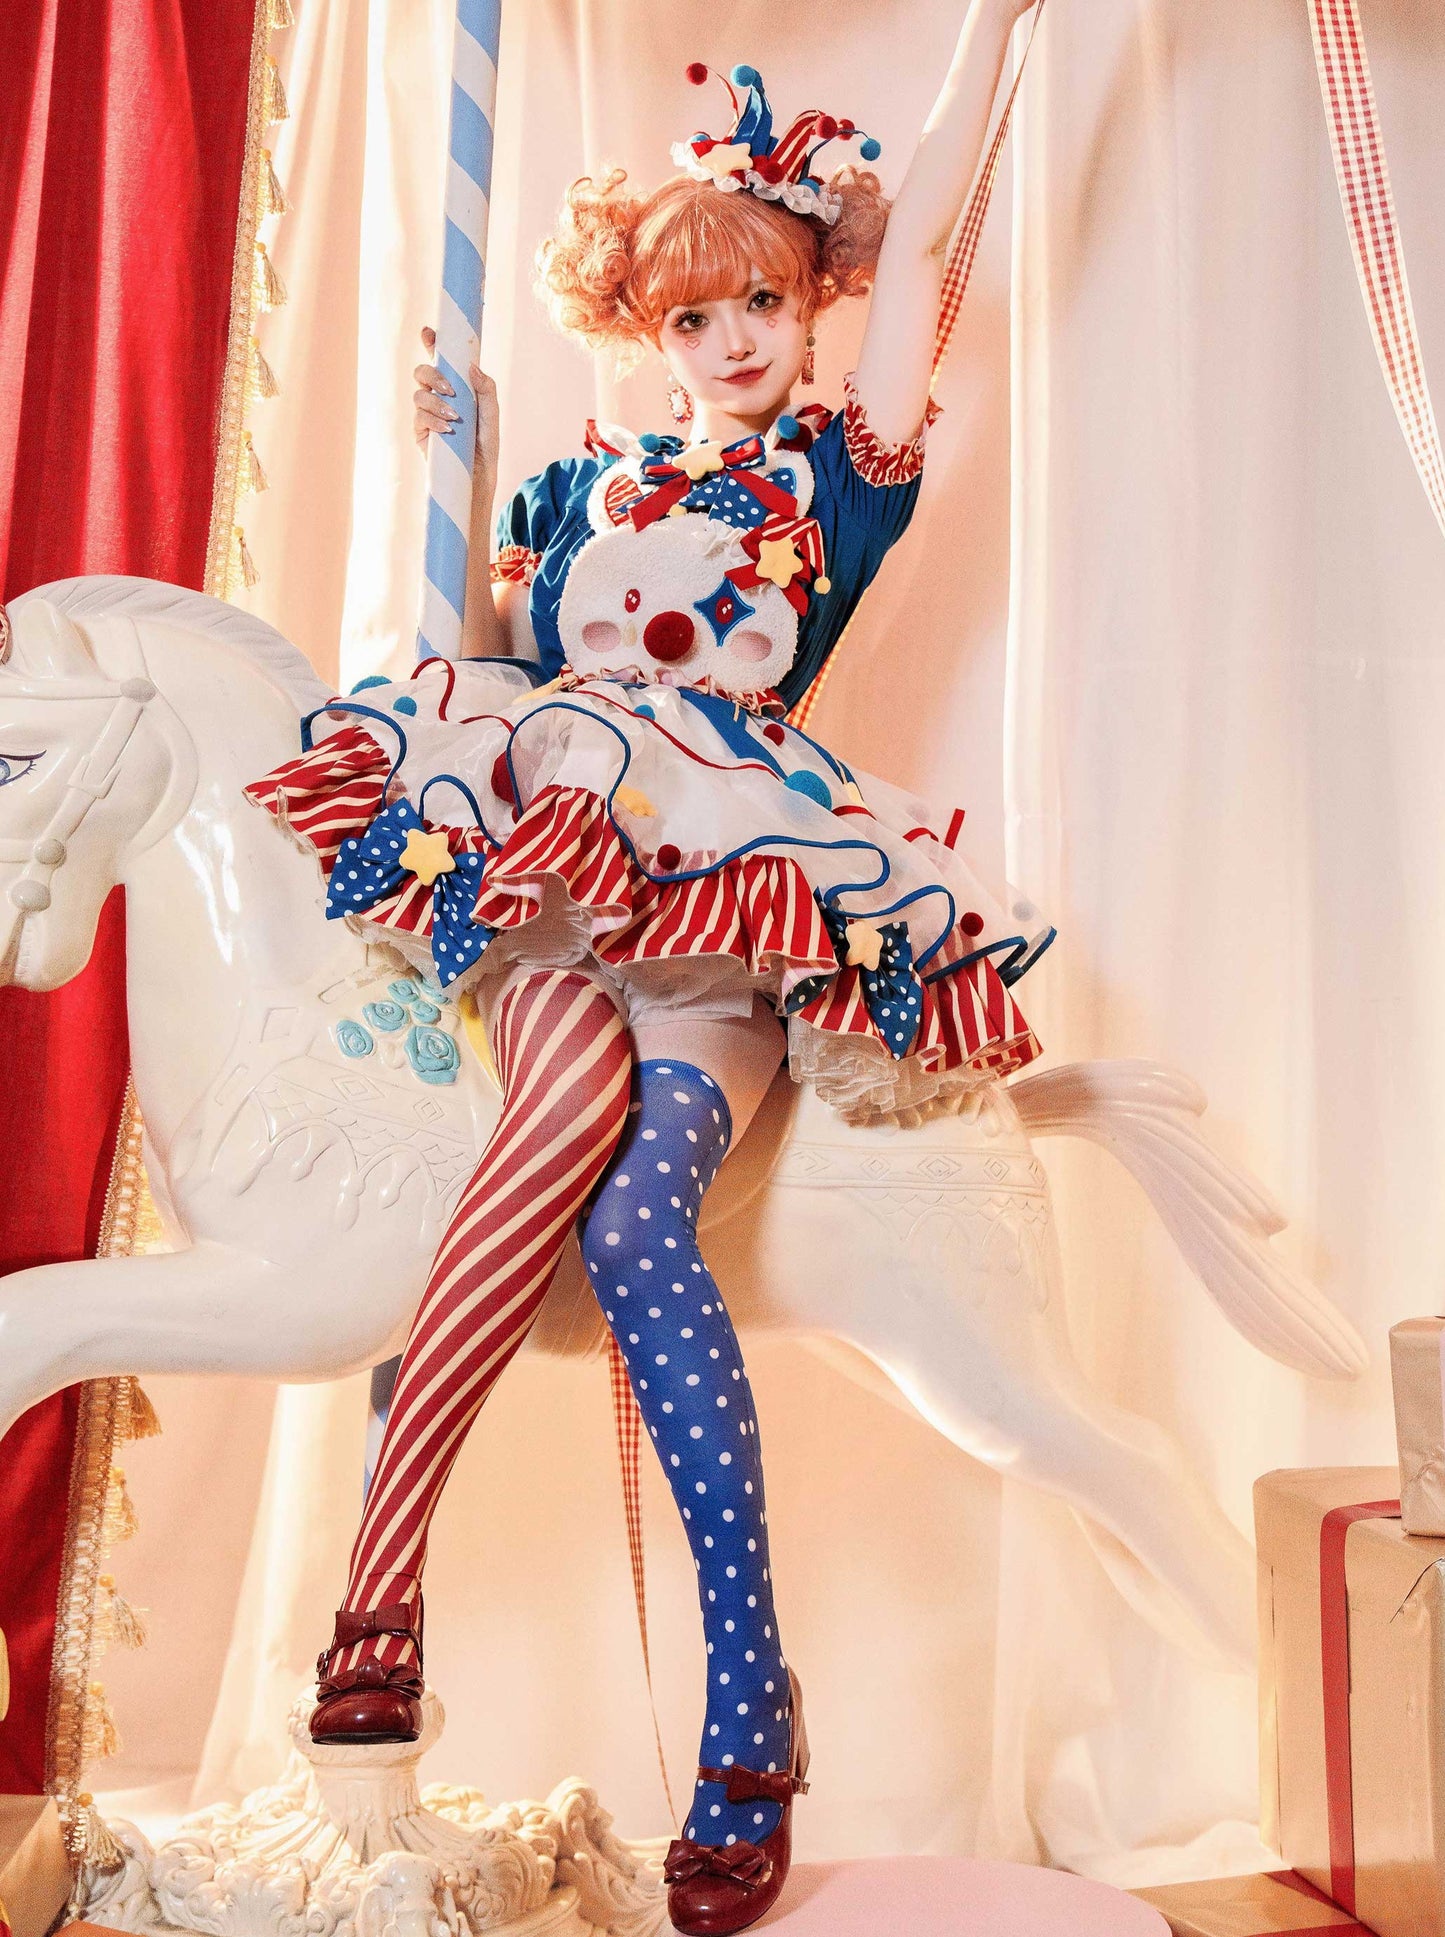 [Deadline for reservation: July 15] Clown Bunny Circus Sweet Lolita🎪